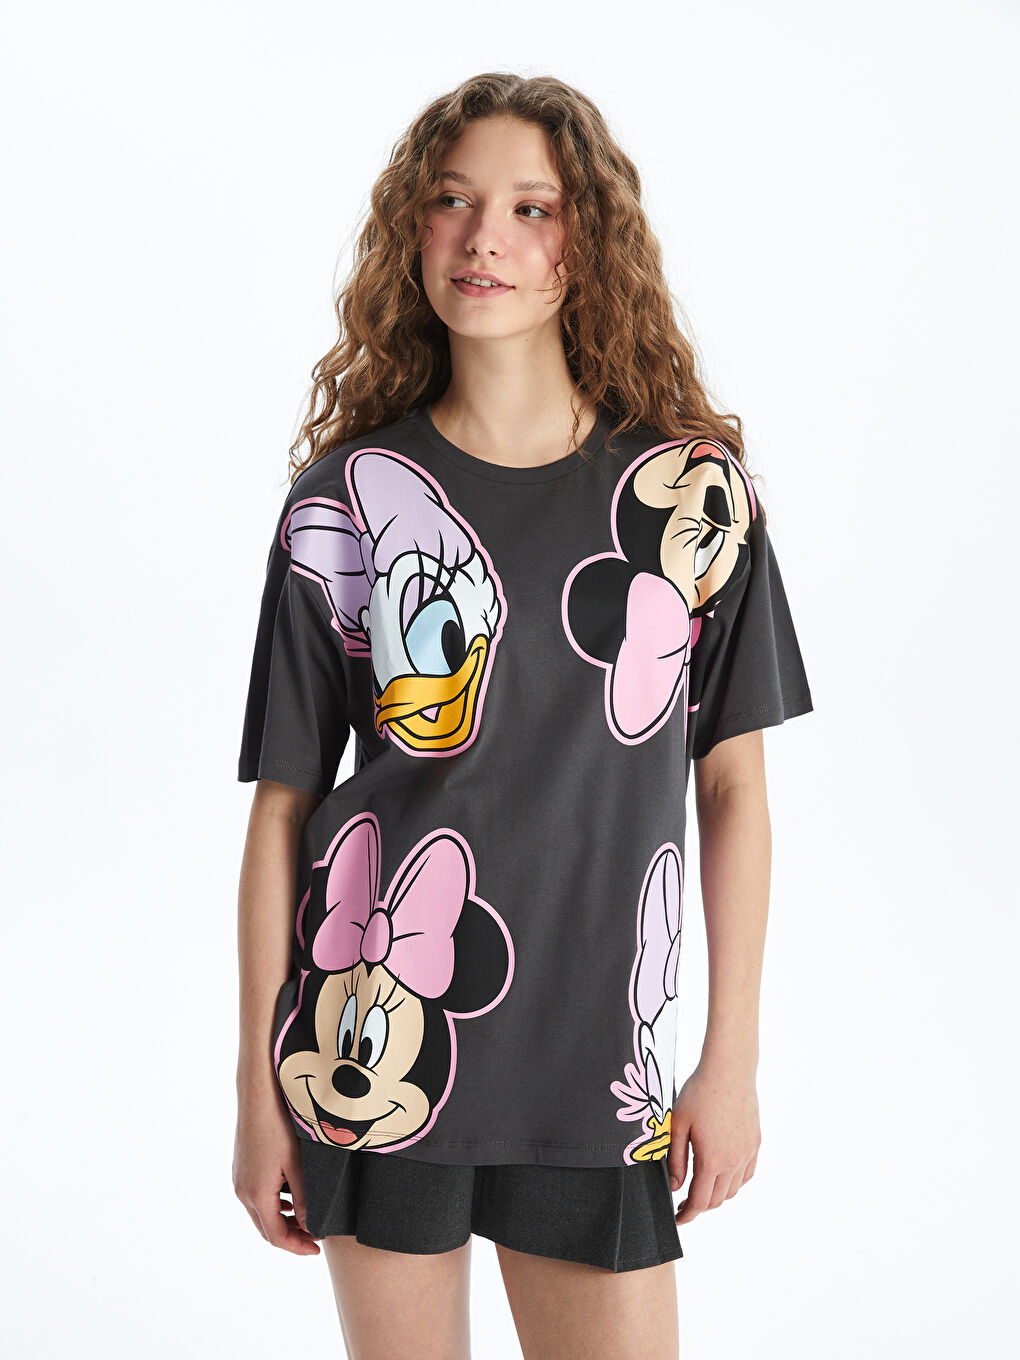 Crew Neck Mickey and Friends Printed Short Sleeve Women's T-Shirt 